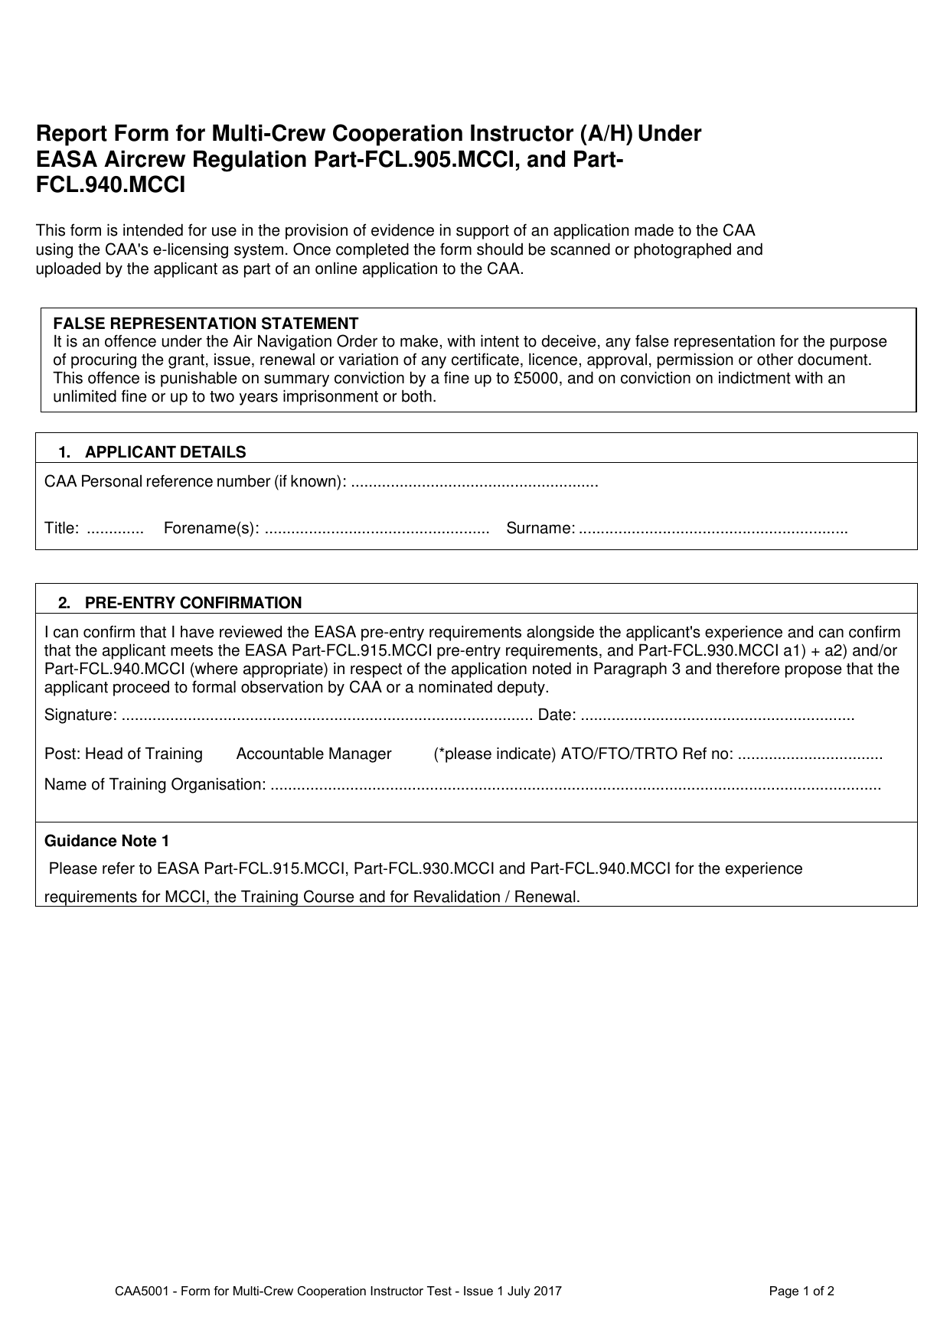 Form CAA5001 Report Form for Multi-Crew Cooperation Instructor (A / H) Under Easa Aircrew Regulation Part-Fcl.905.mcci, and Part-Fcl.940.mcci - United Kingdom, Page 1